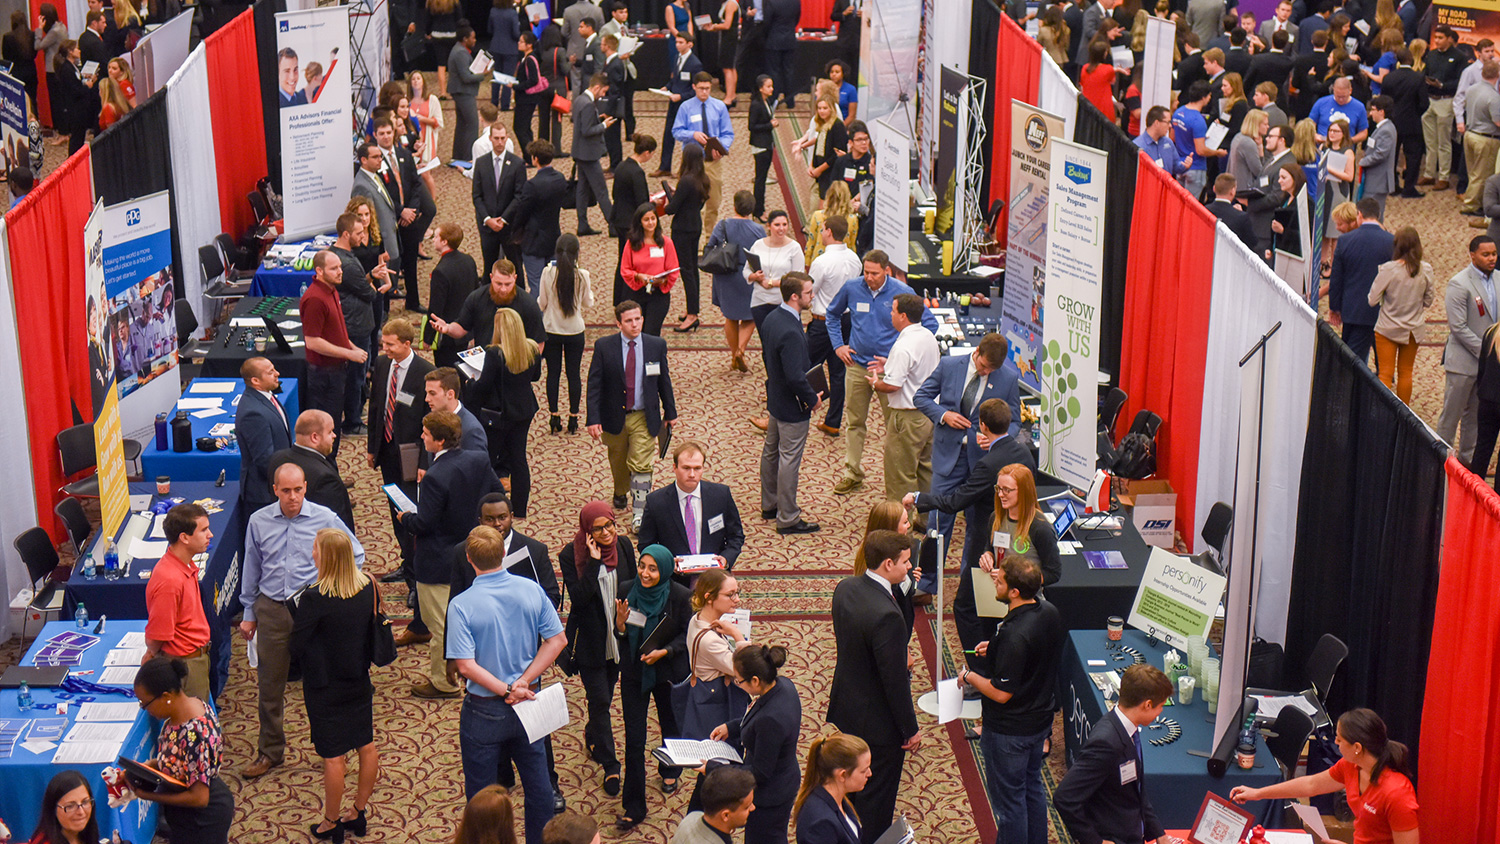 An overhead view of Poole College's Fall 2017 Career and Internship Fair